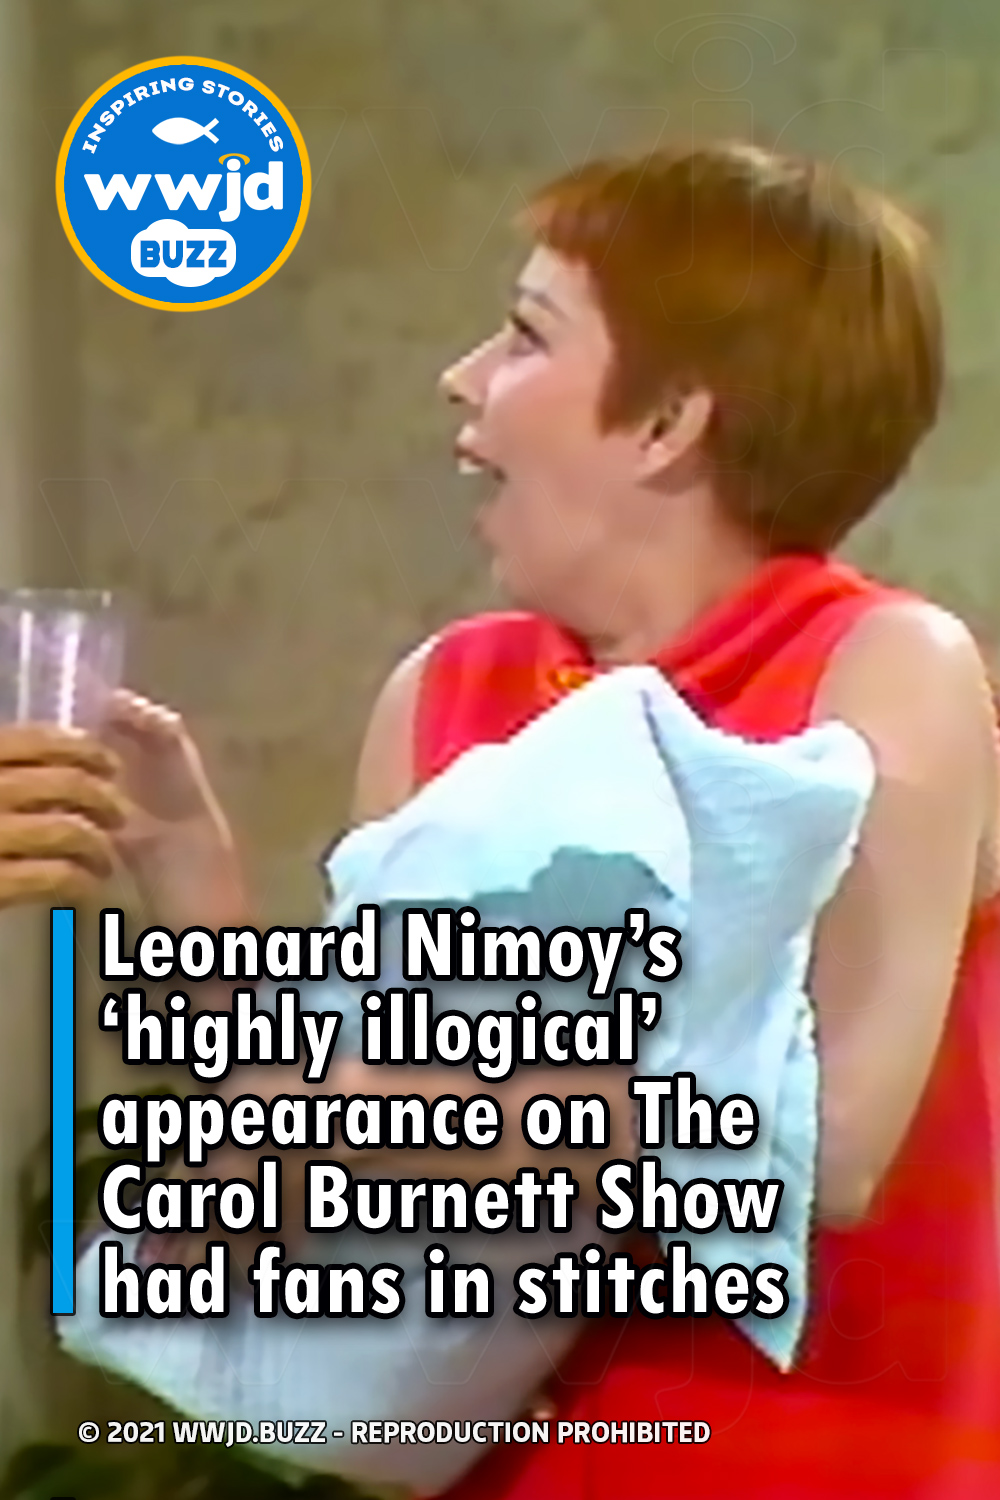 Leonard Nimoy’s ‘highly illogical’ appearance on The Carol Burnett Show had fans in stitches